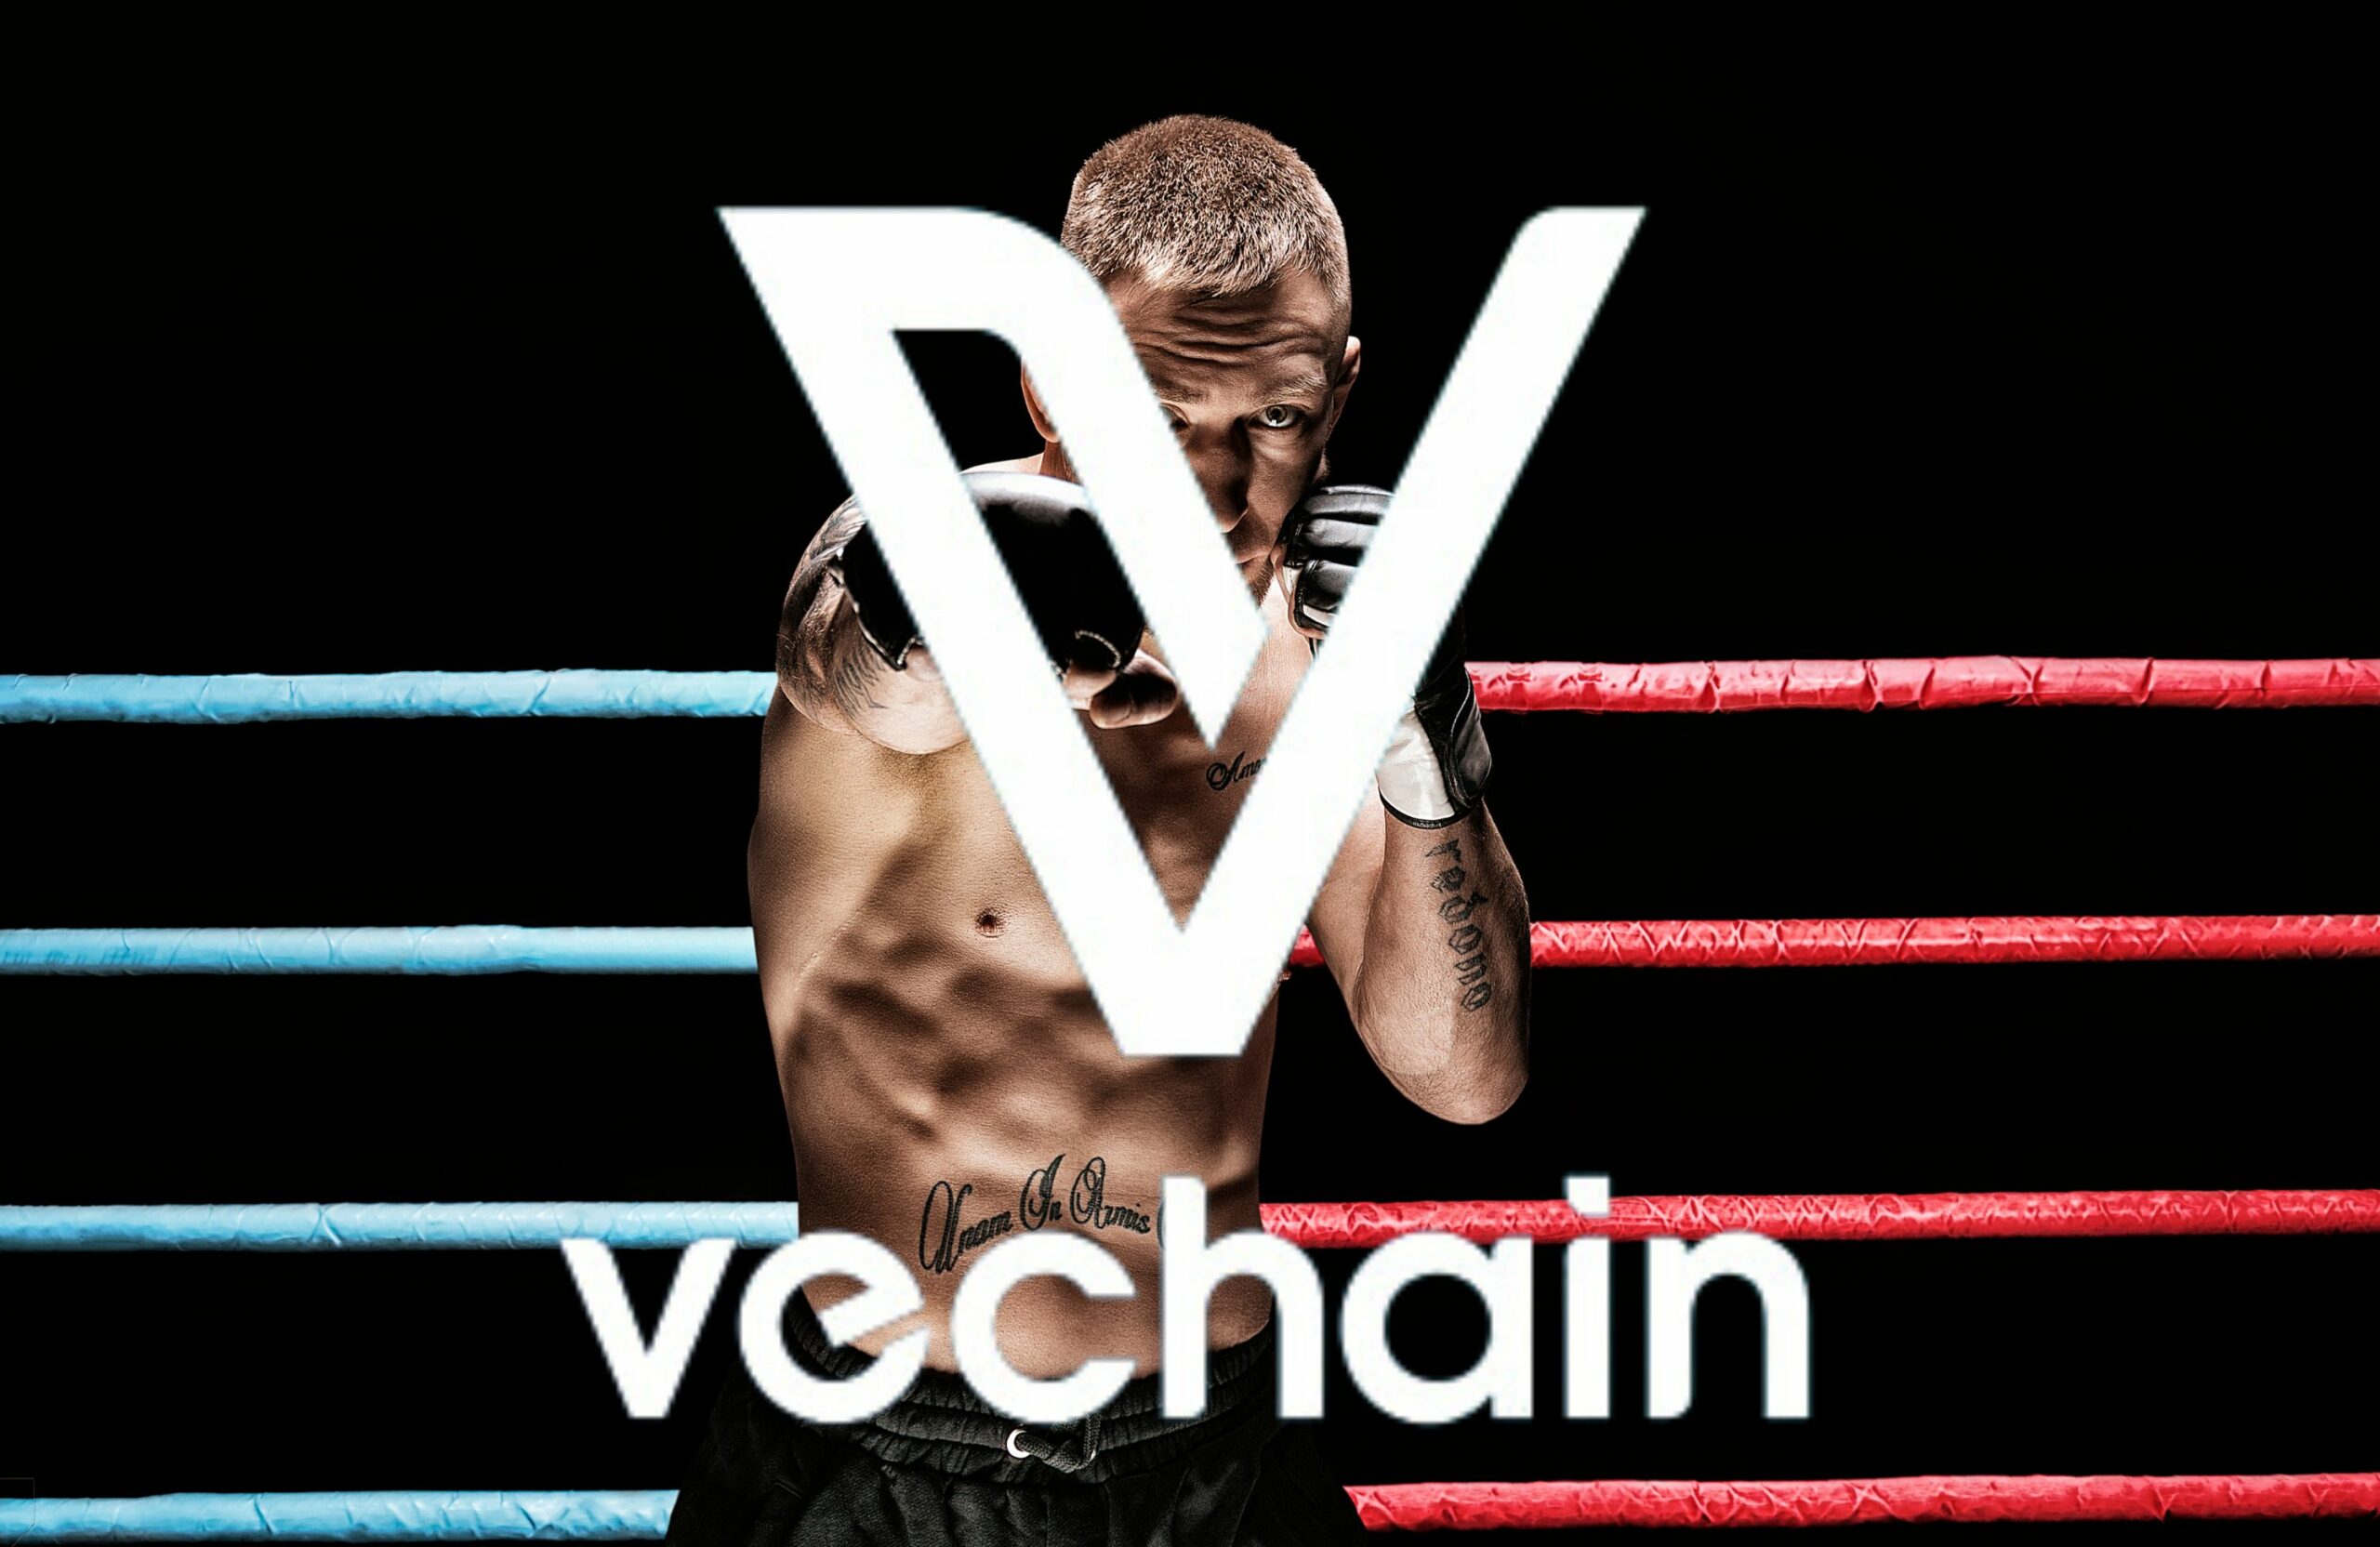 VET Price: VeChain's VeChainThor smart contract network verifies UFC glove authenticity to prevent fraud - could it be the best RWA token?